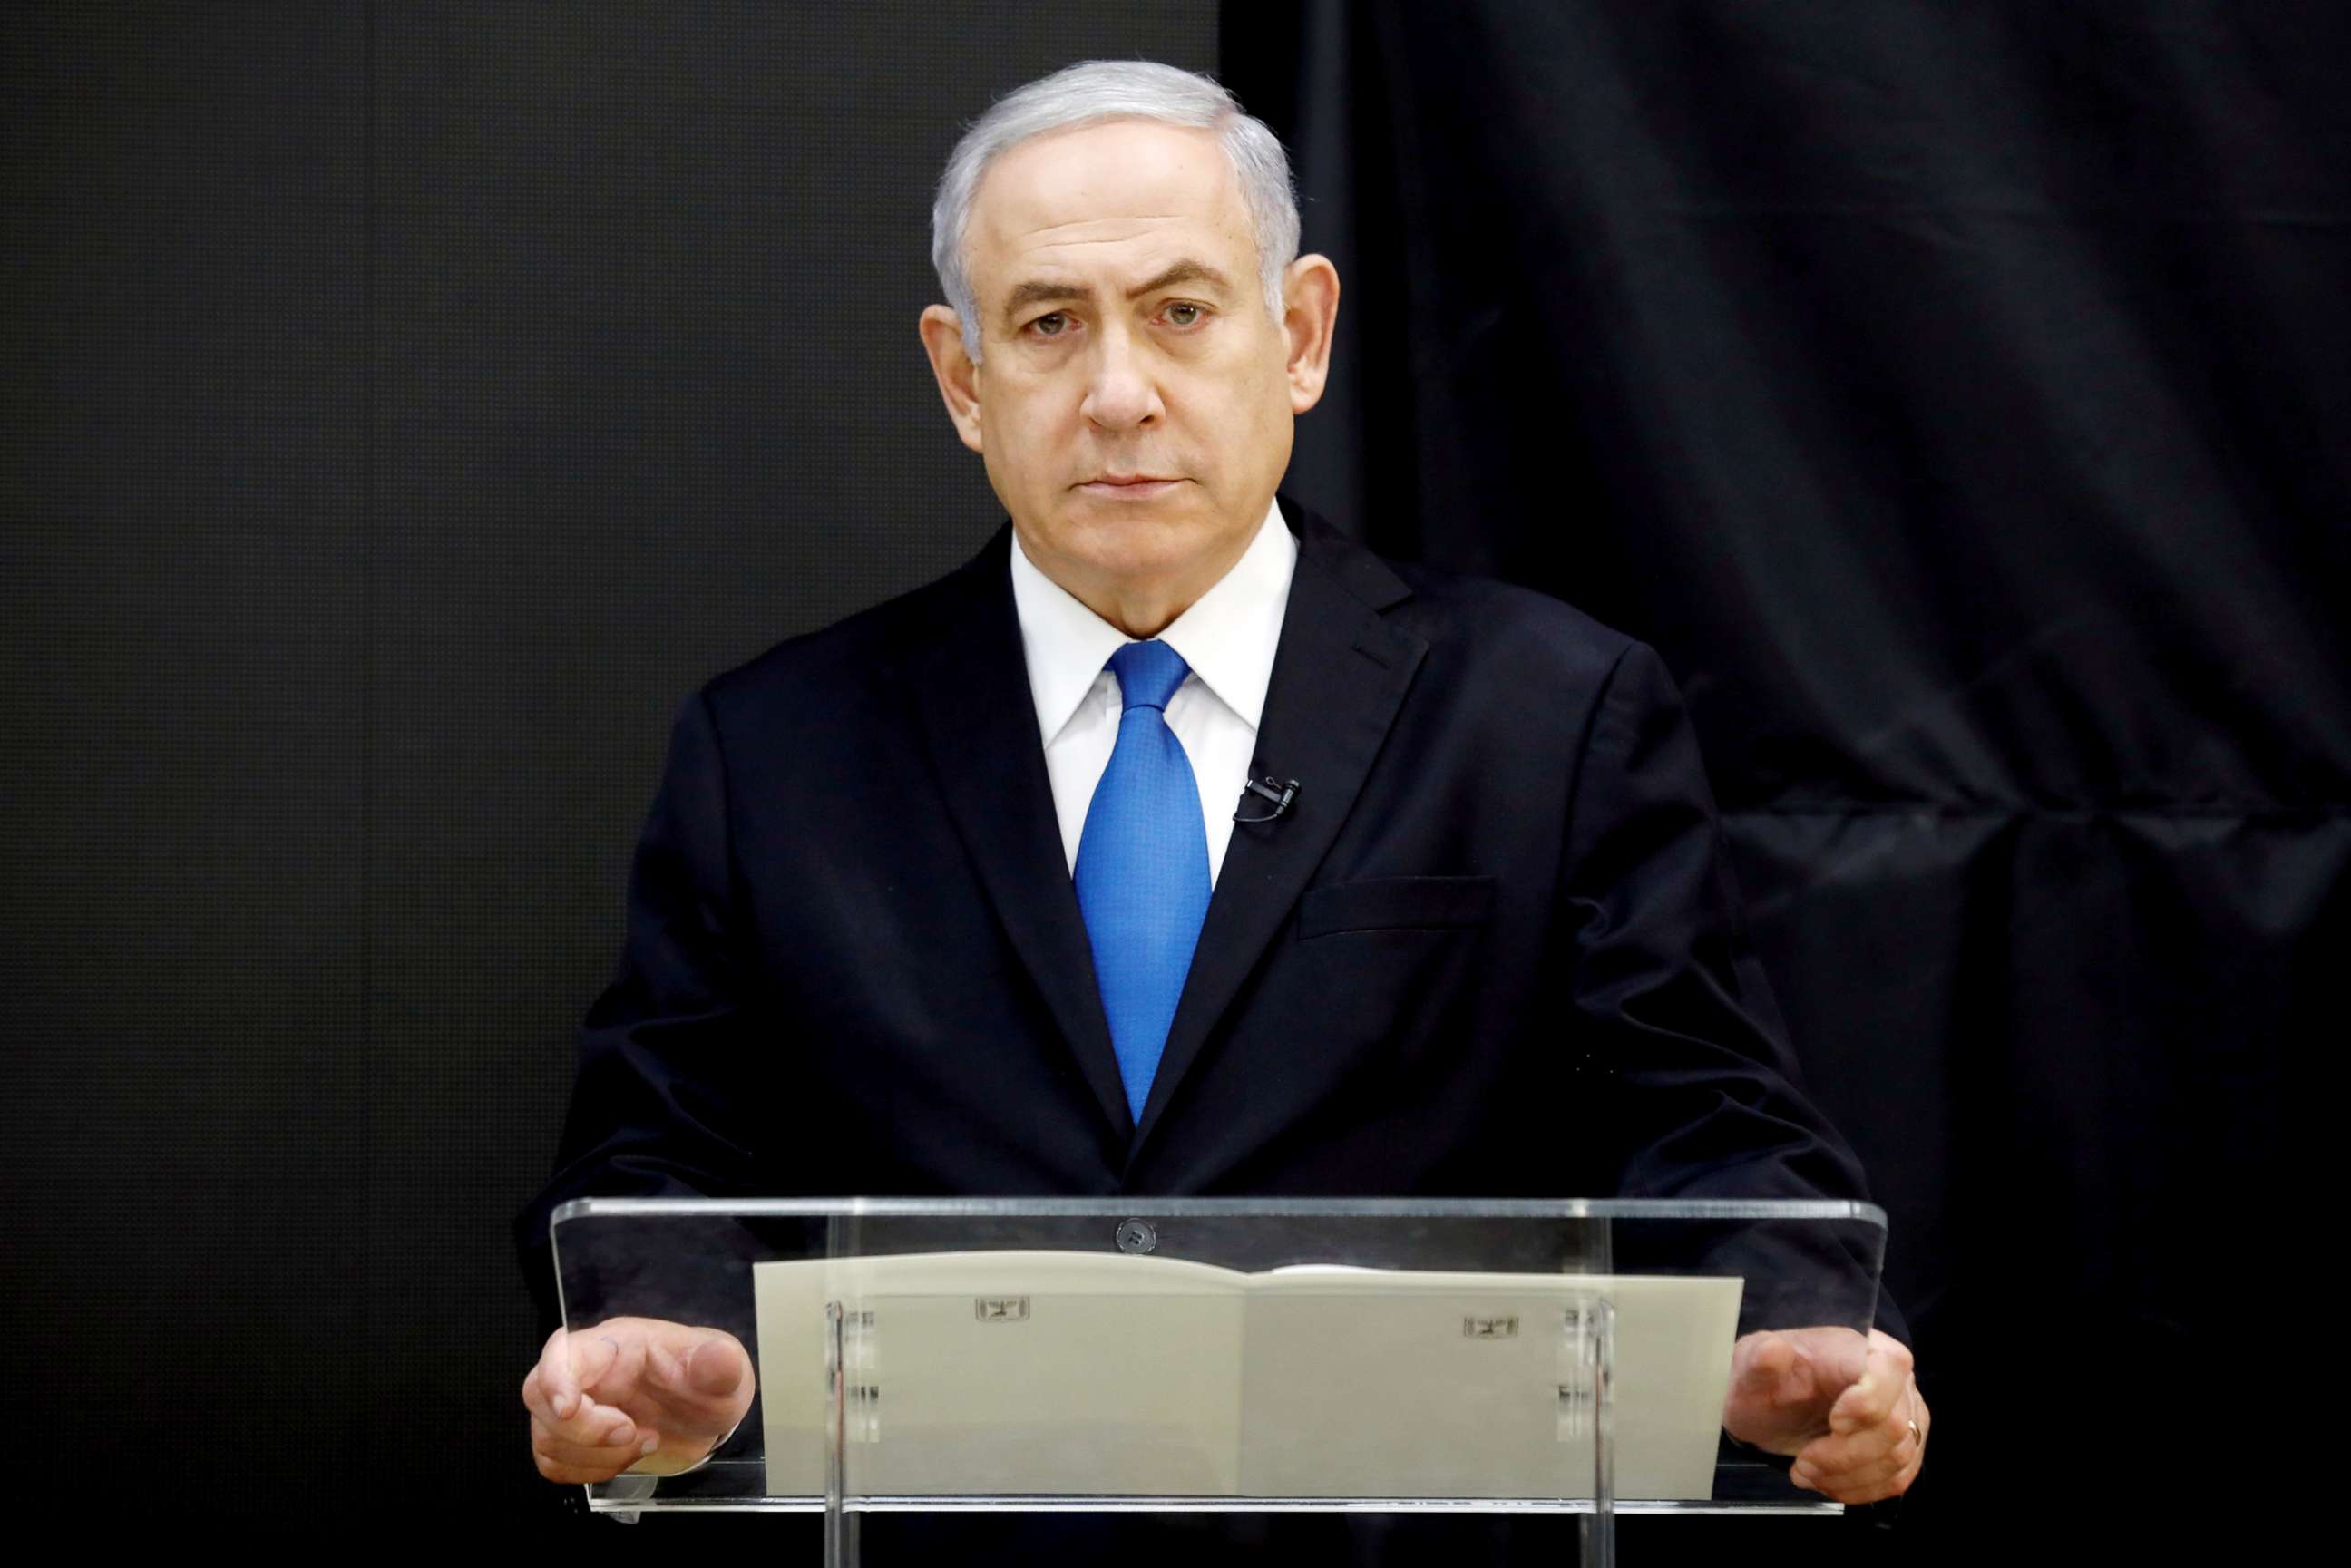 PHOTO: Israeli Prime minister Benjamin Netanyahu speaks during a news conference at the Ministry of Defence in Tel Aviv, Israel, April 30, 2018.